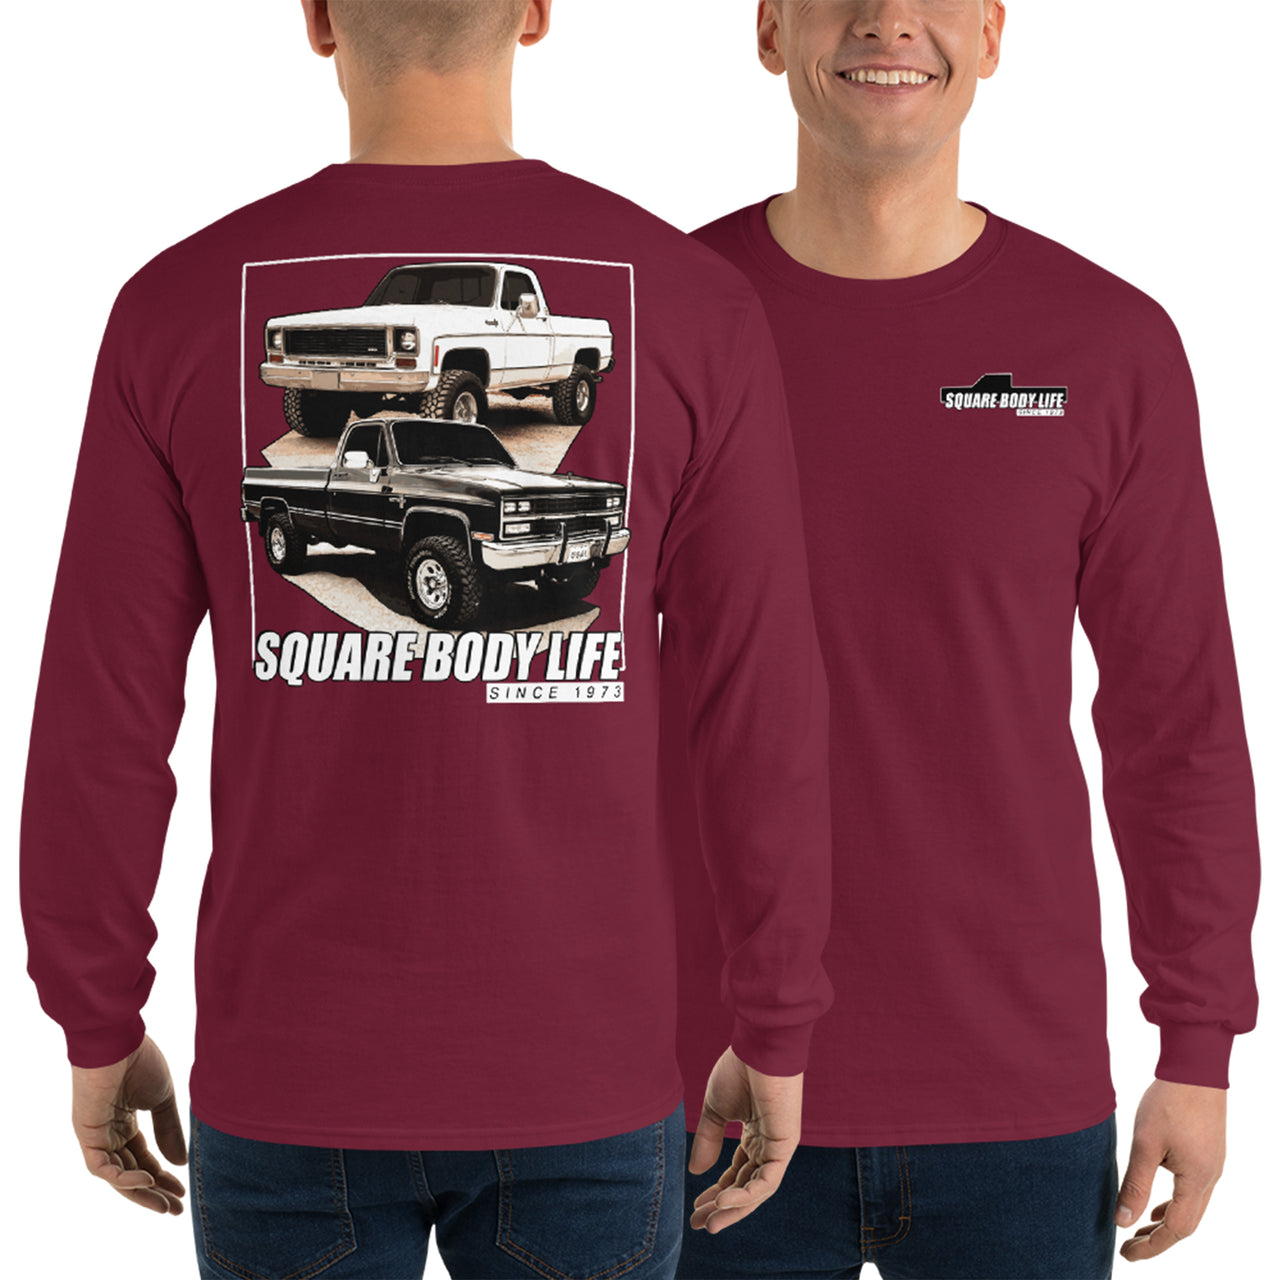 Square Body Life Long Sleeve T-Shirt modeled in maroon